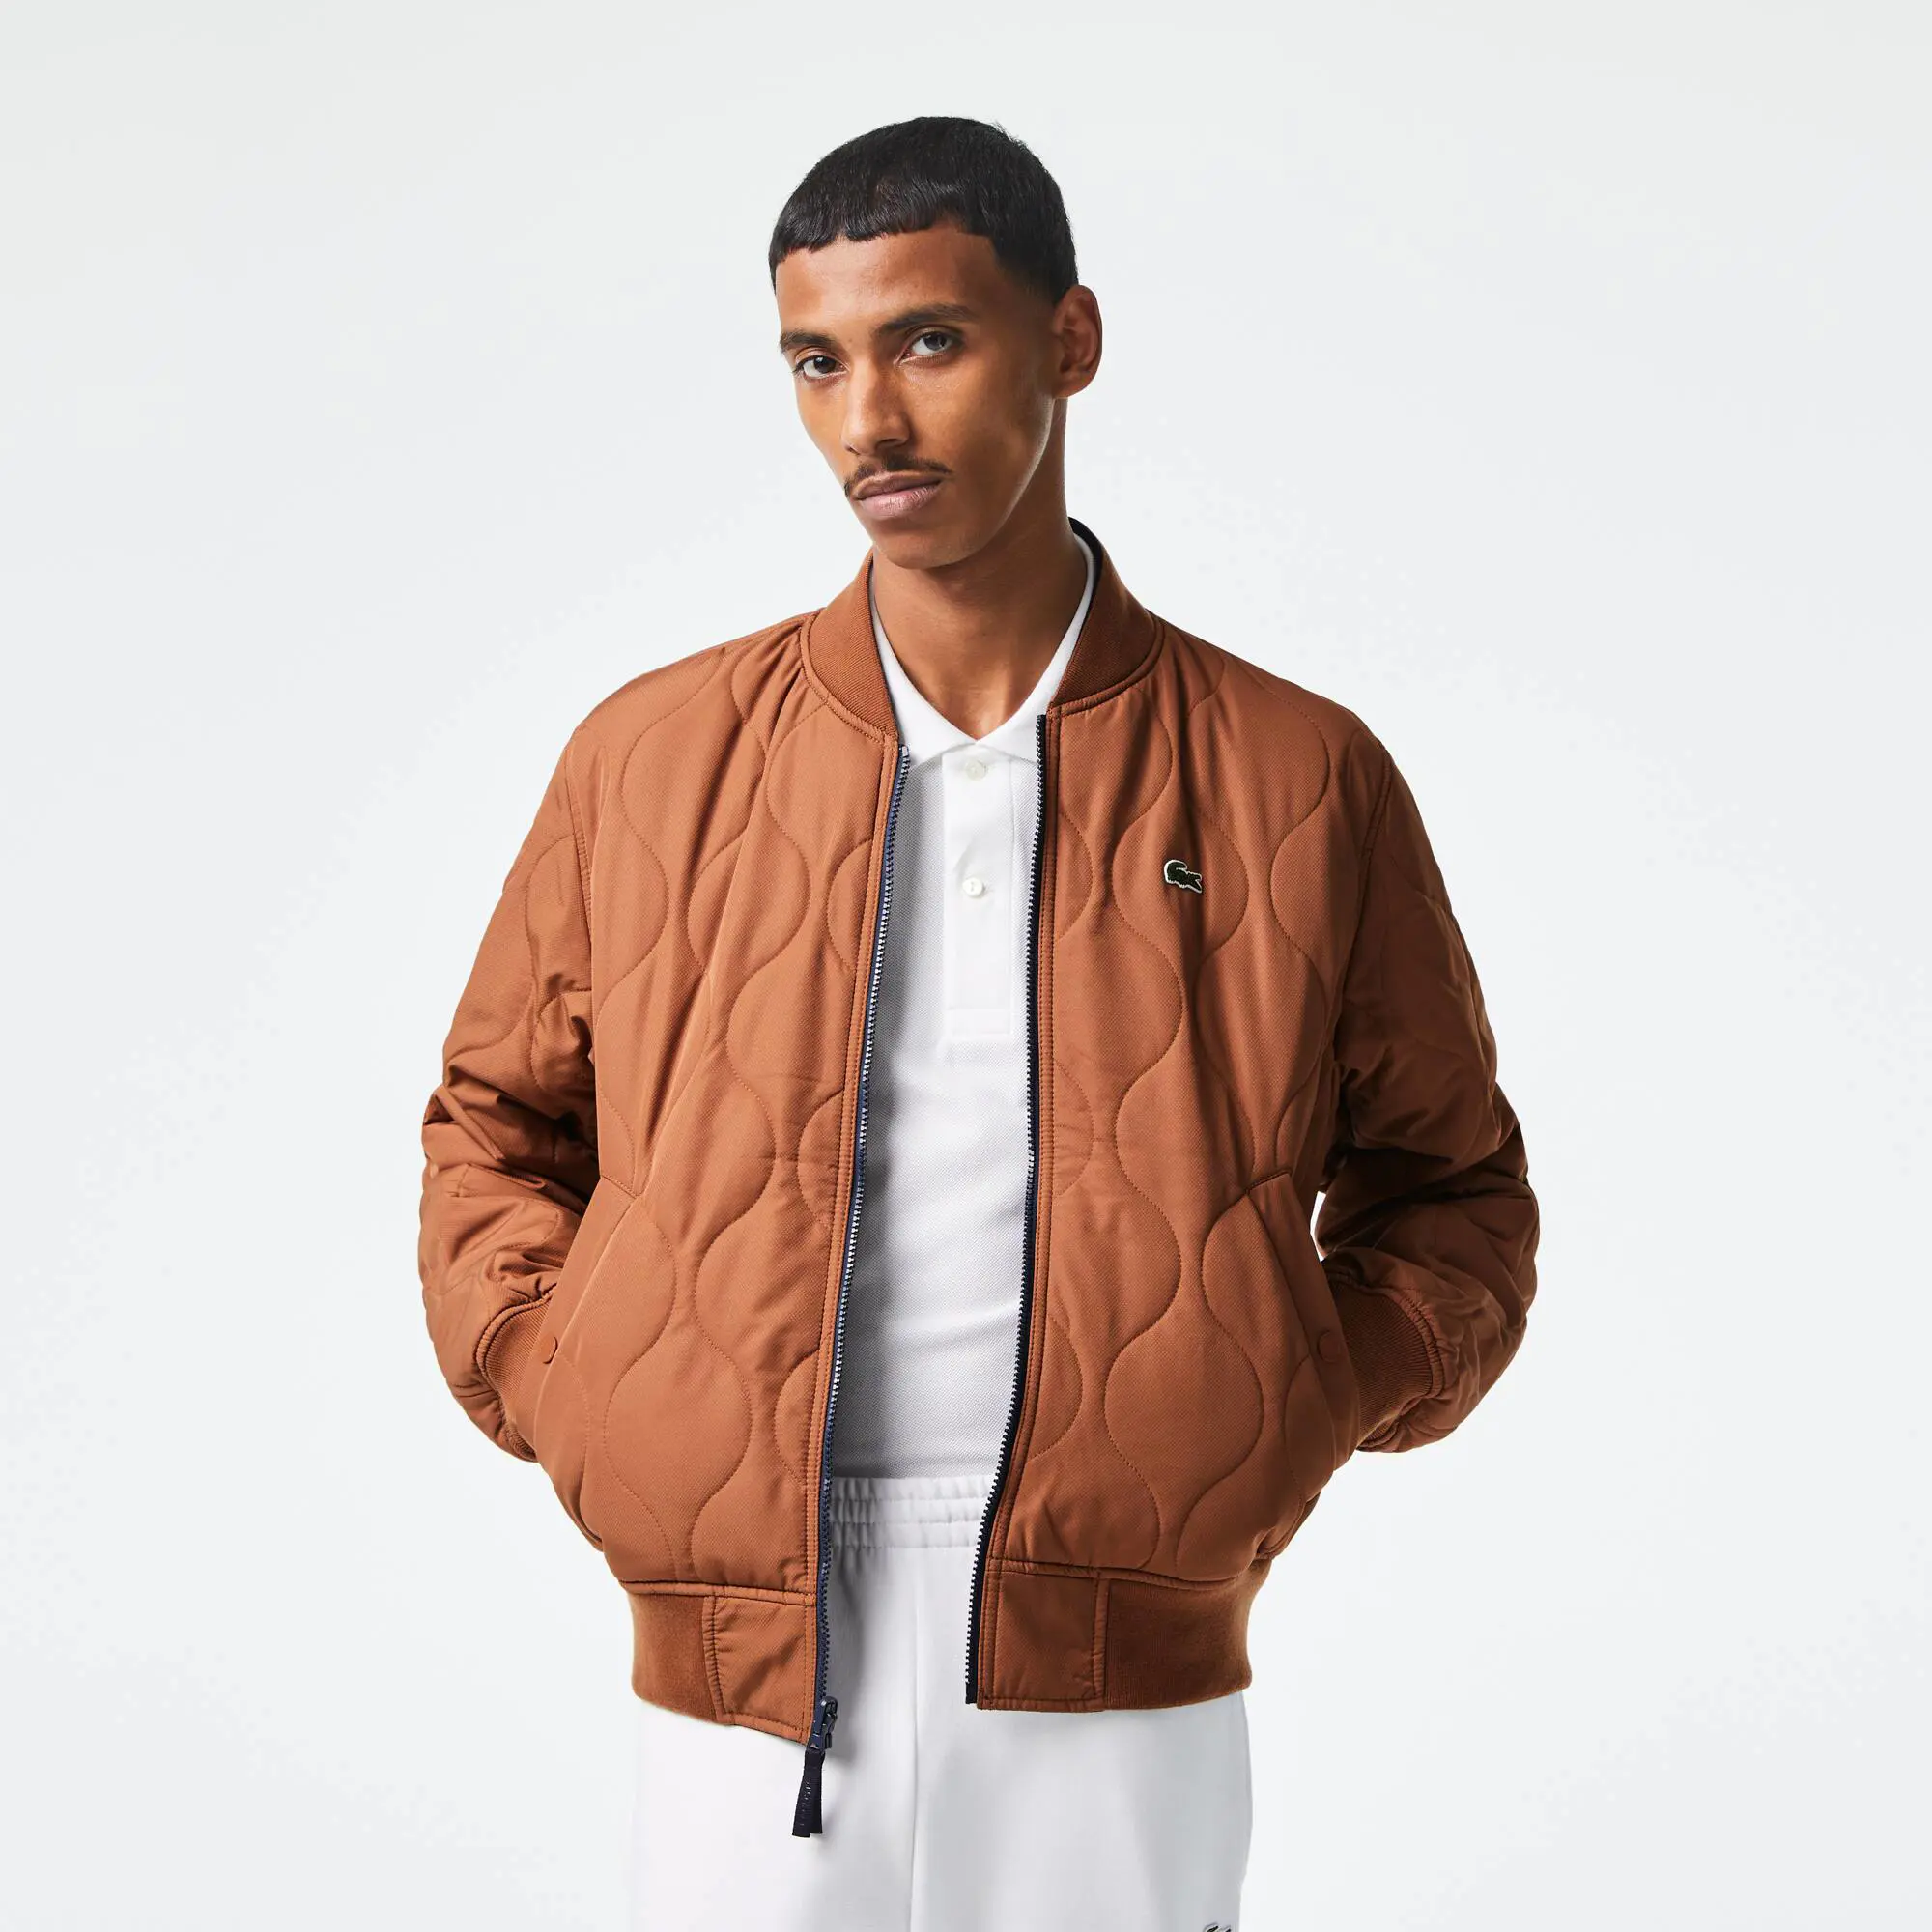 Lacoste Men's Lacoste Reversible Quilted Taffeta Bomber Jacket. 1